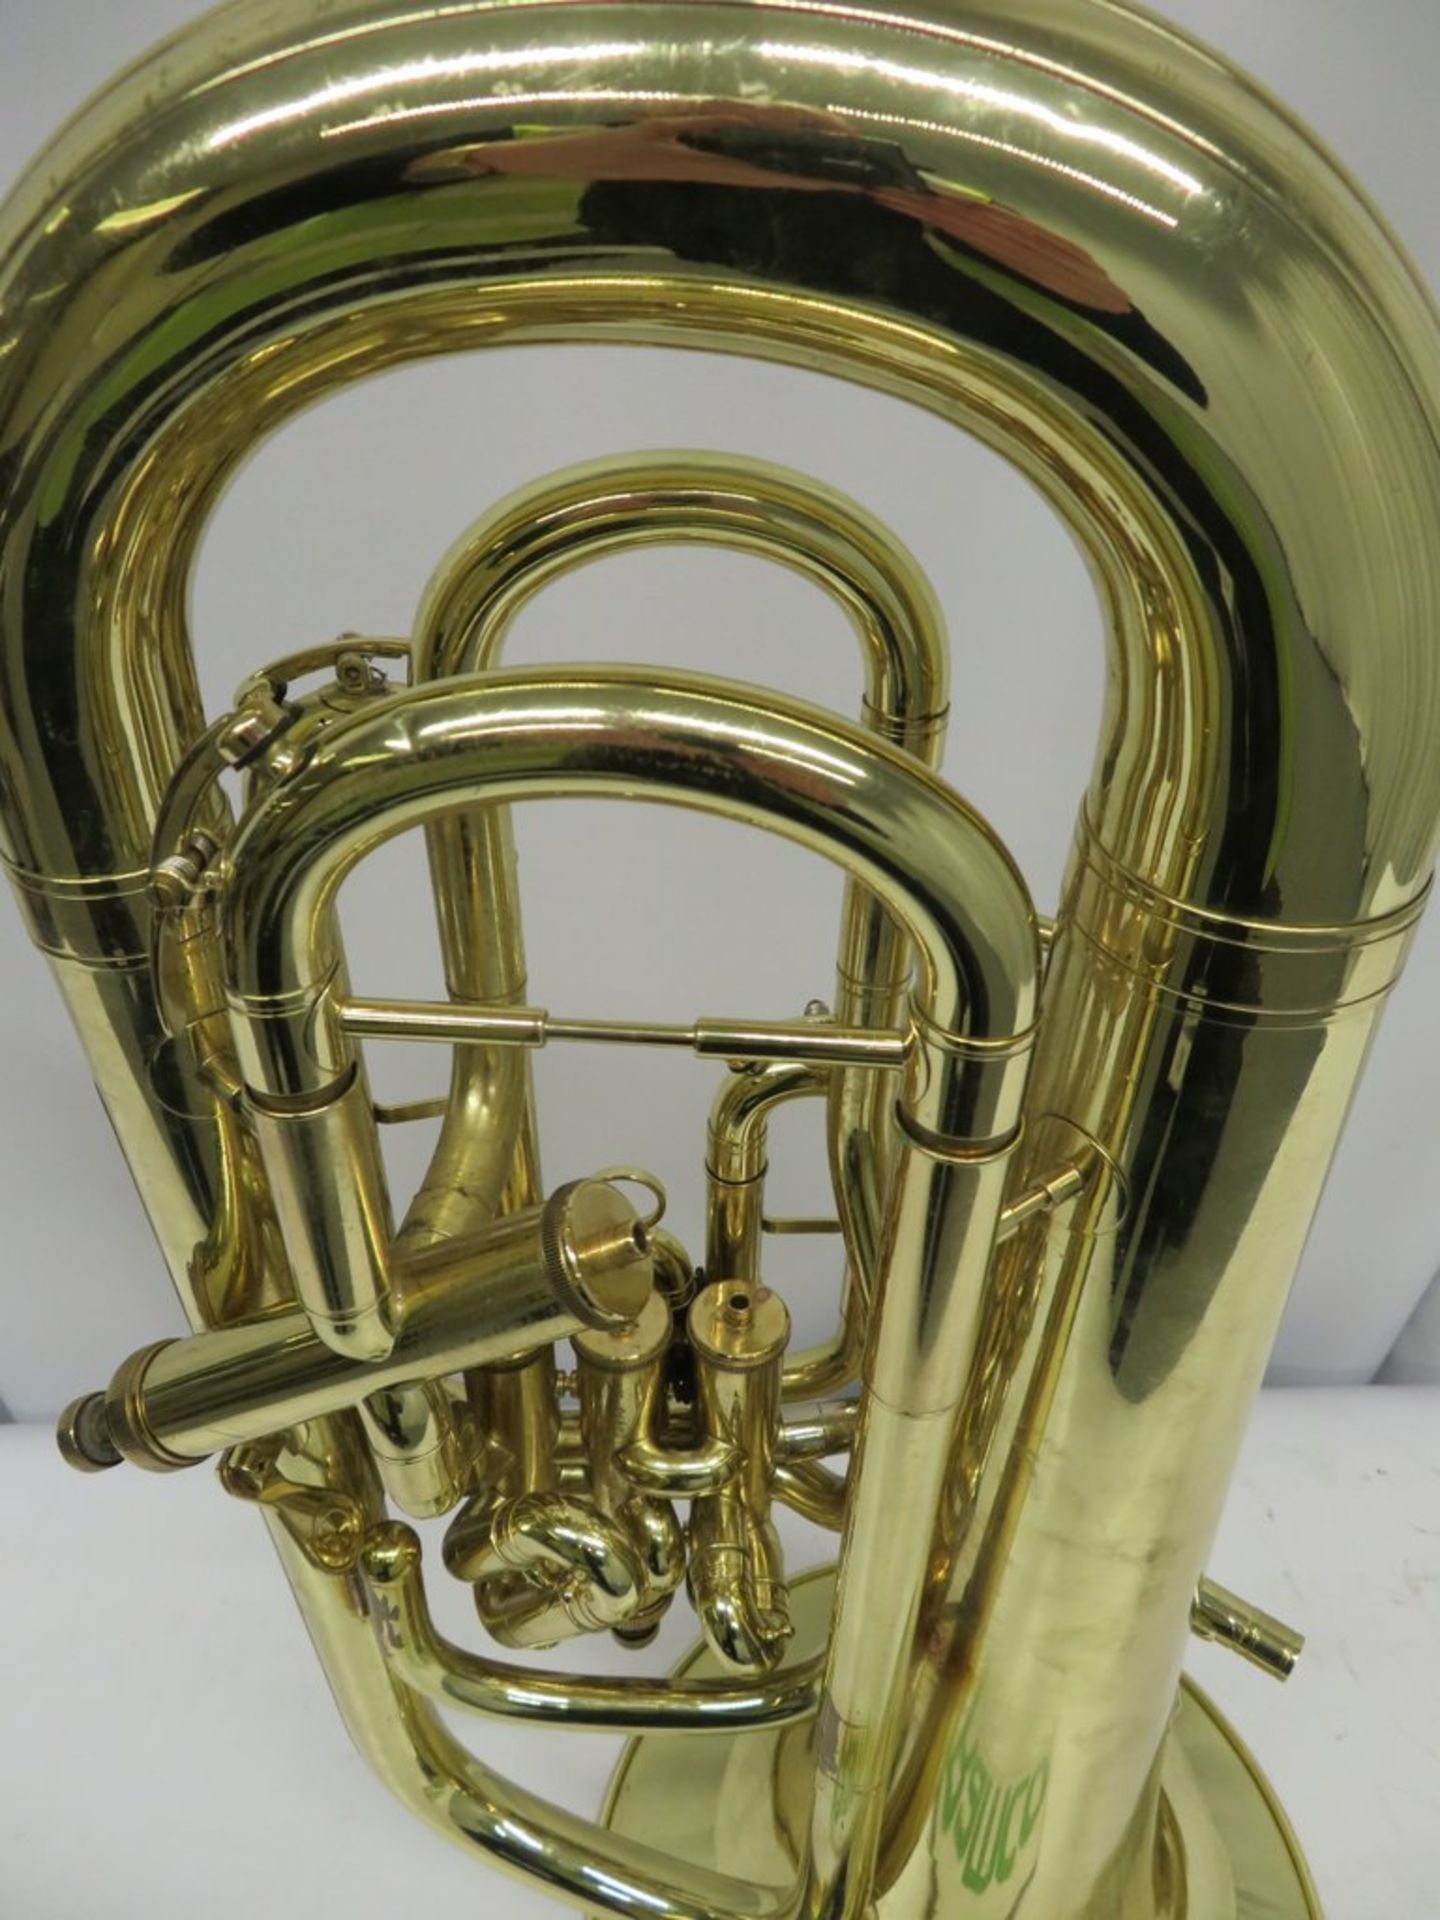 Wilson Euphonium With Case. Serial Number: 2950TA. Please Note This Item Has Not Been Test - Image 14 of 17